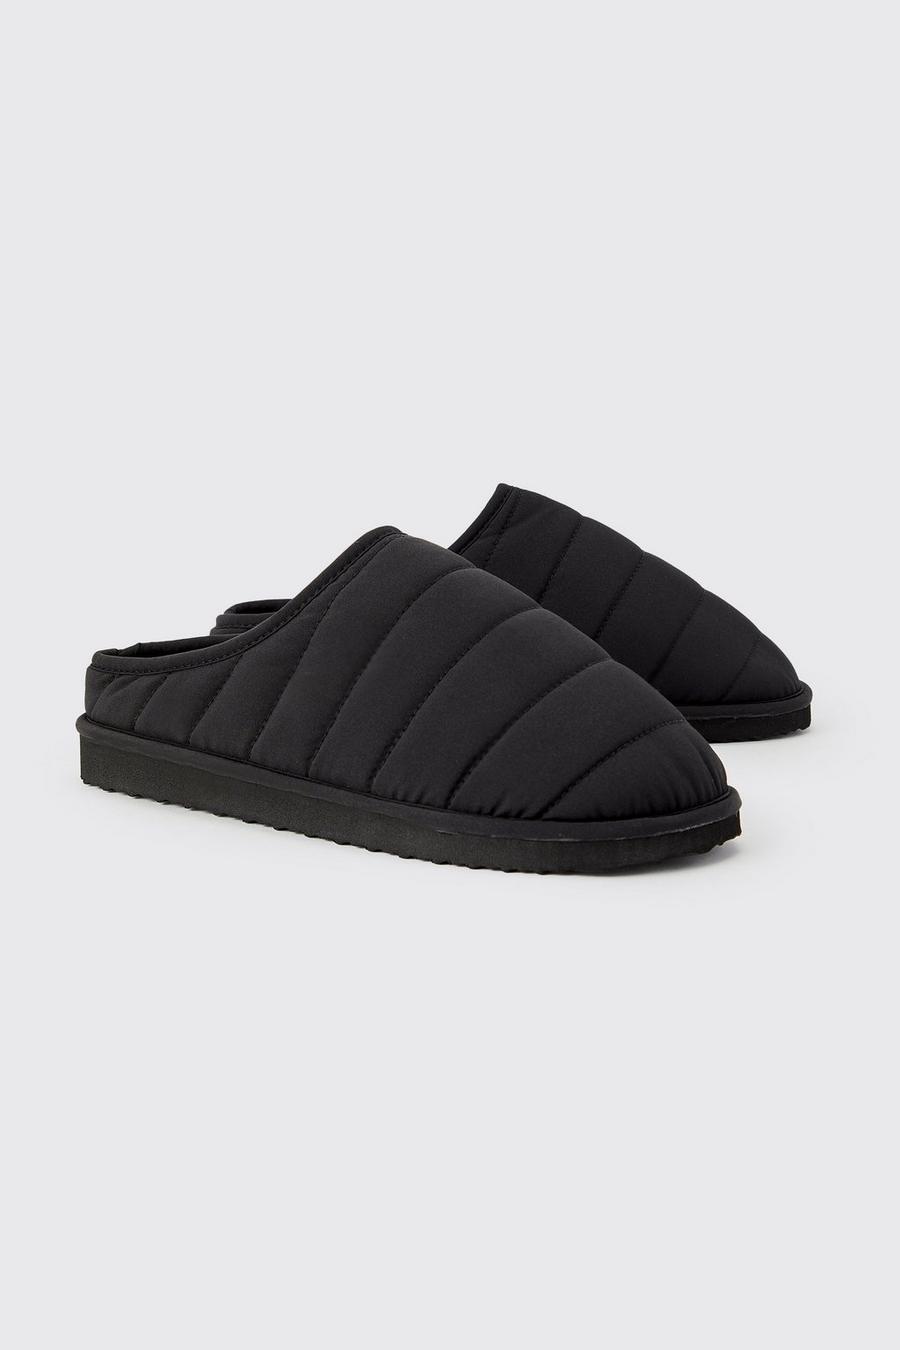 Black Nylon Quilted Slippers